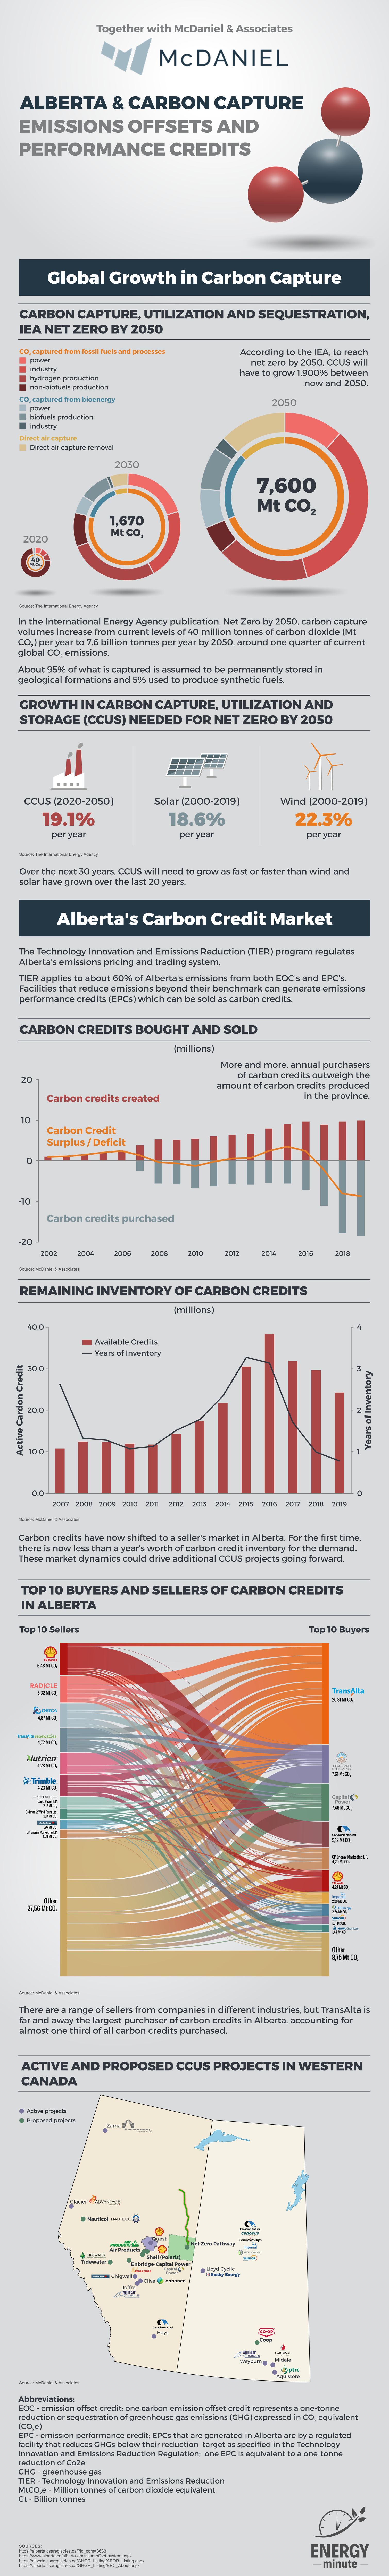 Carbon Capture in Alberta: Offsets, Credits and Projects